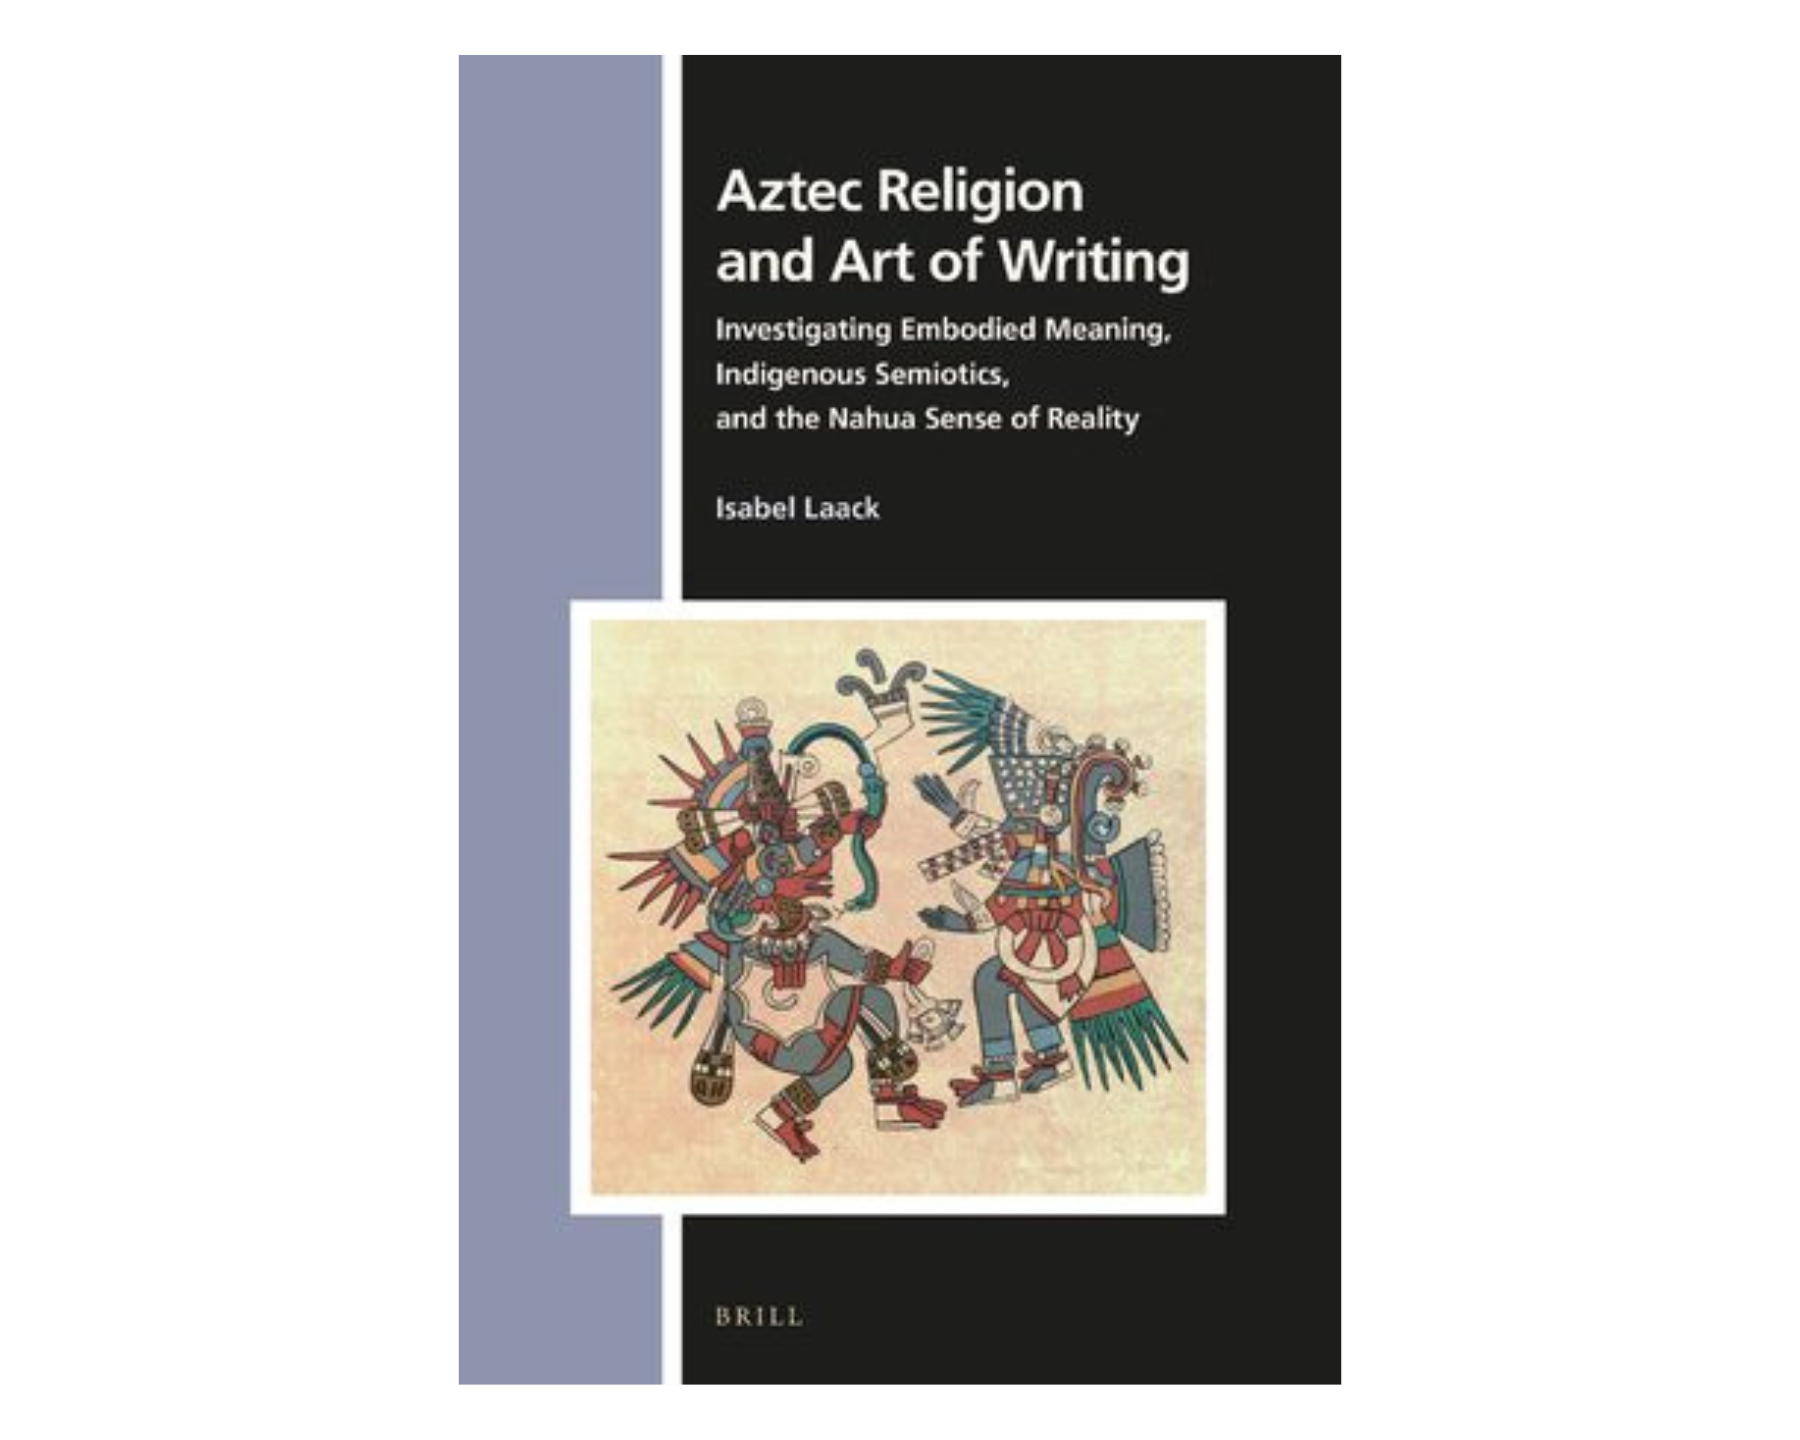 [Translate to Englisch:] Cover: "Aztec Religion and Art of Writing"